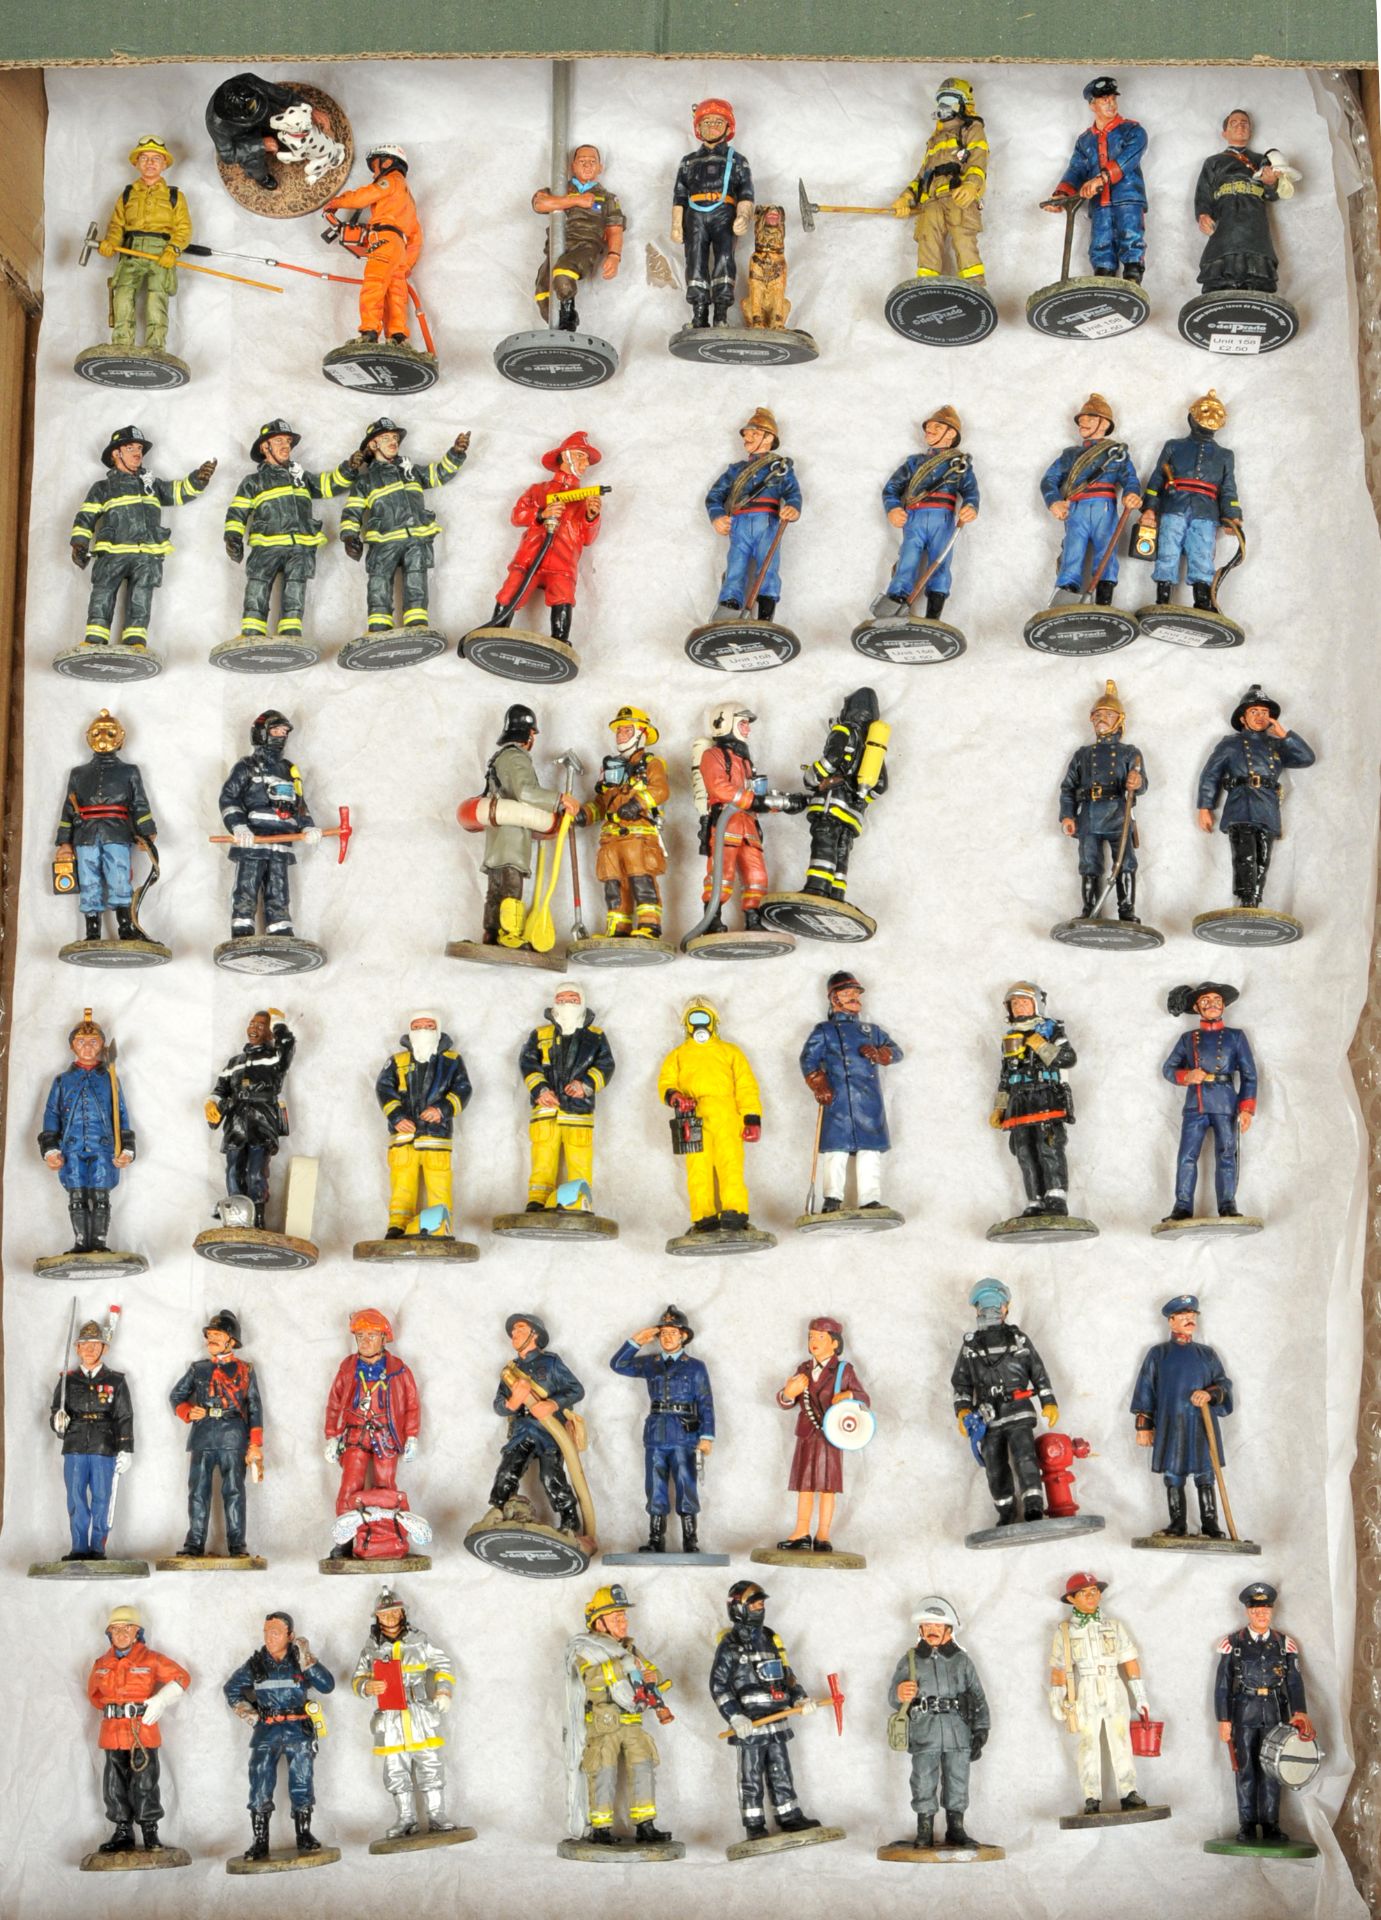 Del Prado Figures - 'Men at War' & 'Firefighters of the World' Series, Unboxed - Image 2 of 3